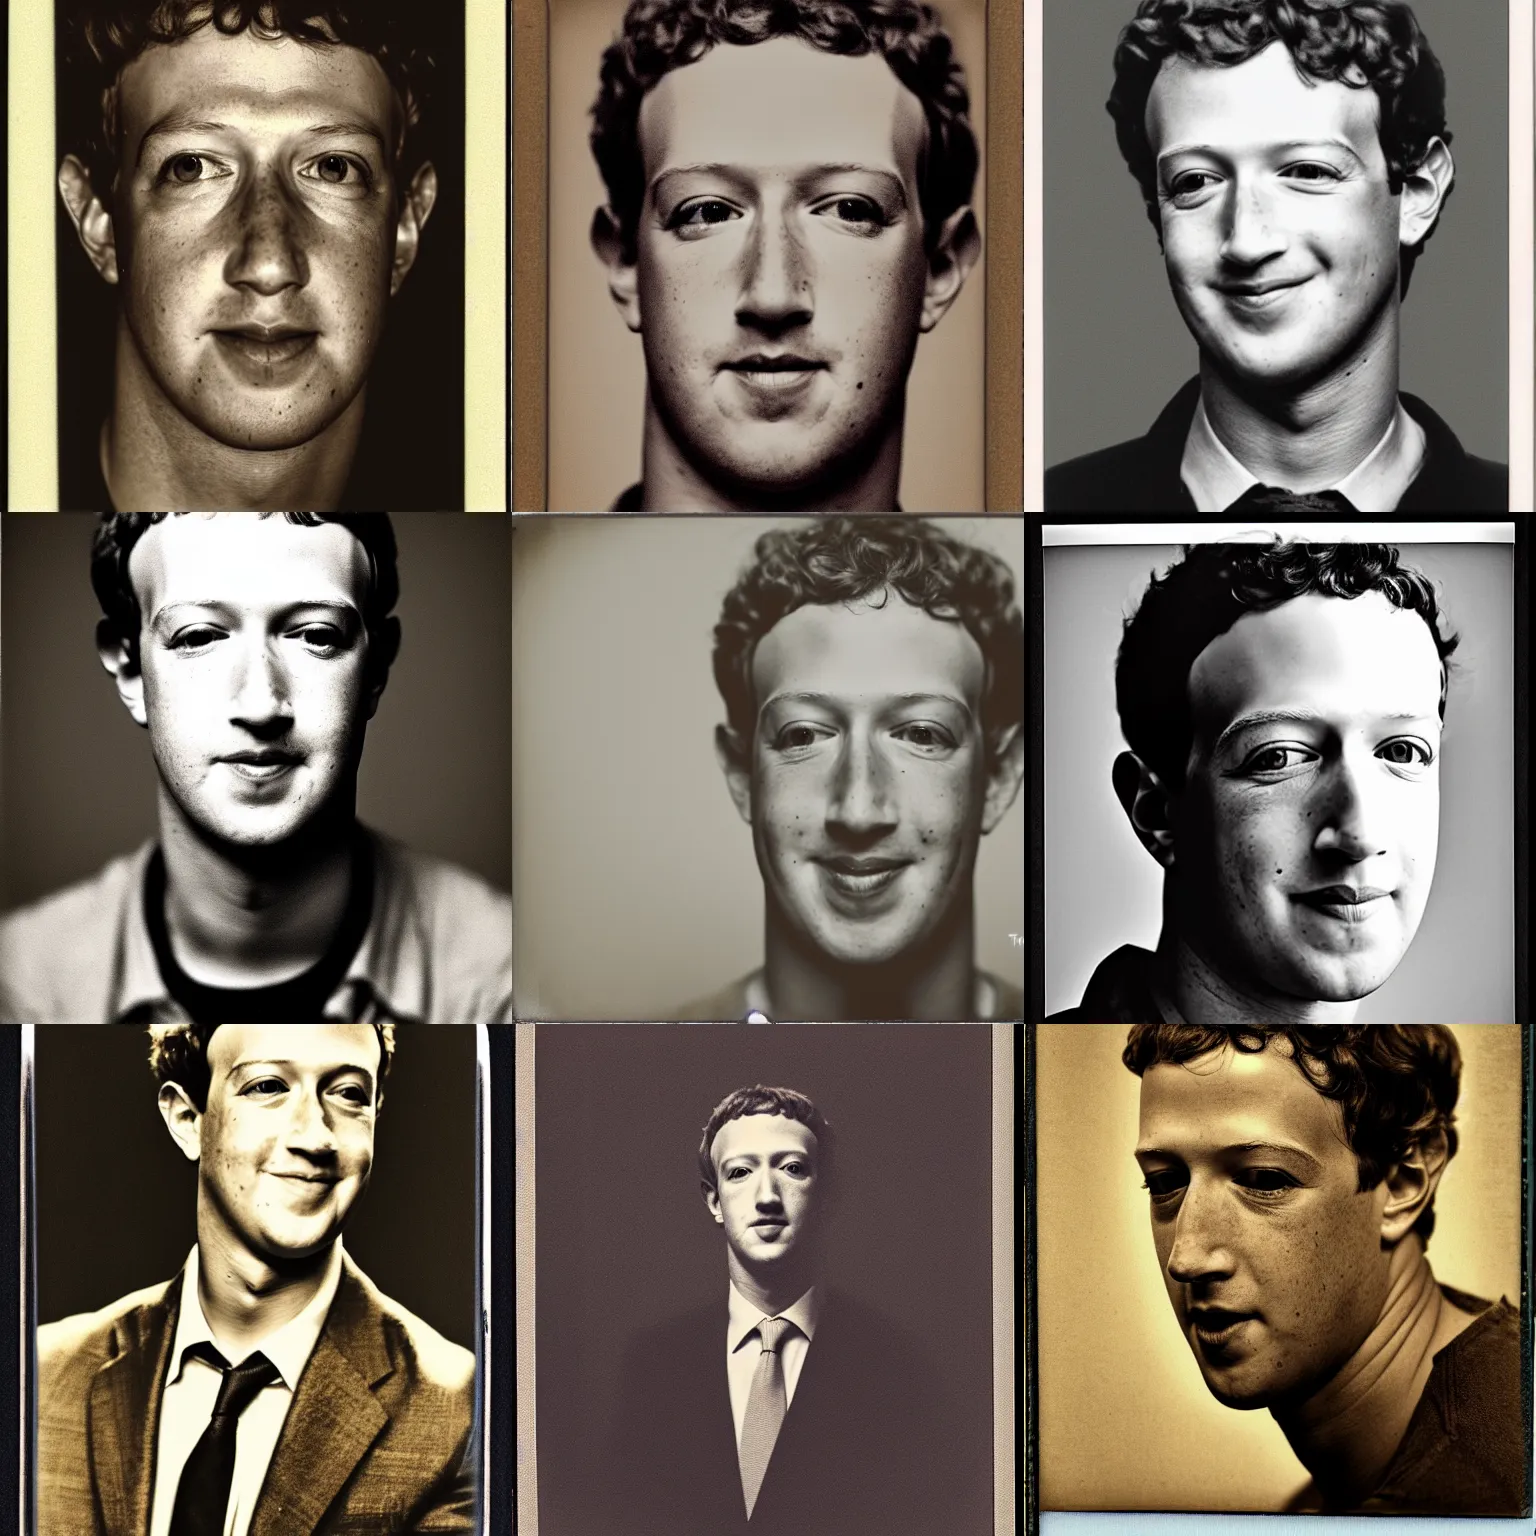 Prompt: mark zuckerberg portrait very close photograph, sepia polaroid by wild west cowboy by true west archives